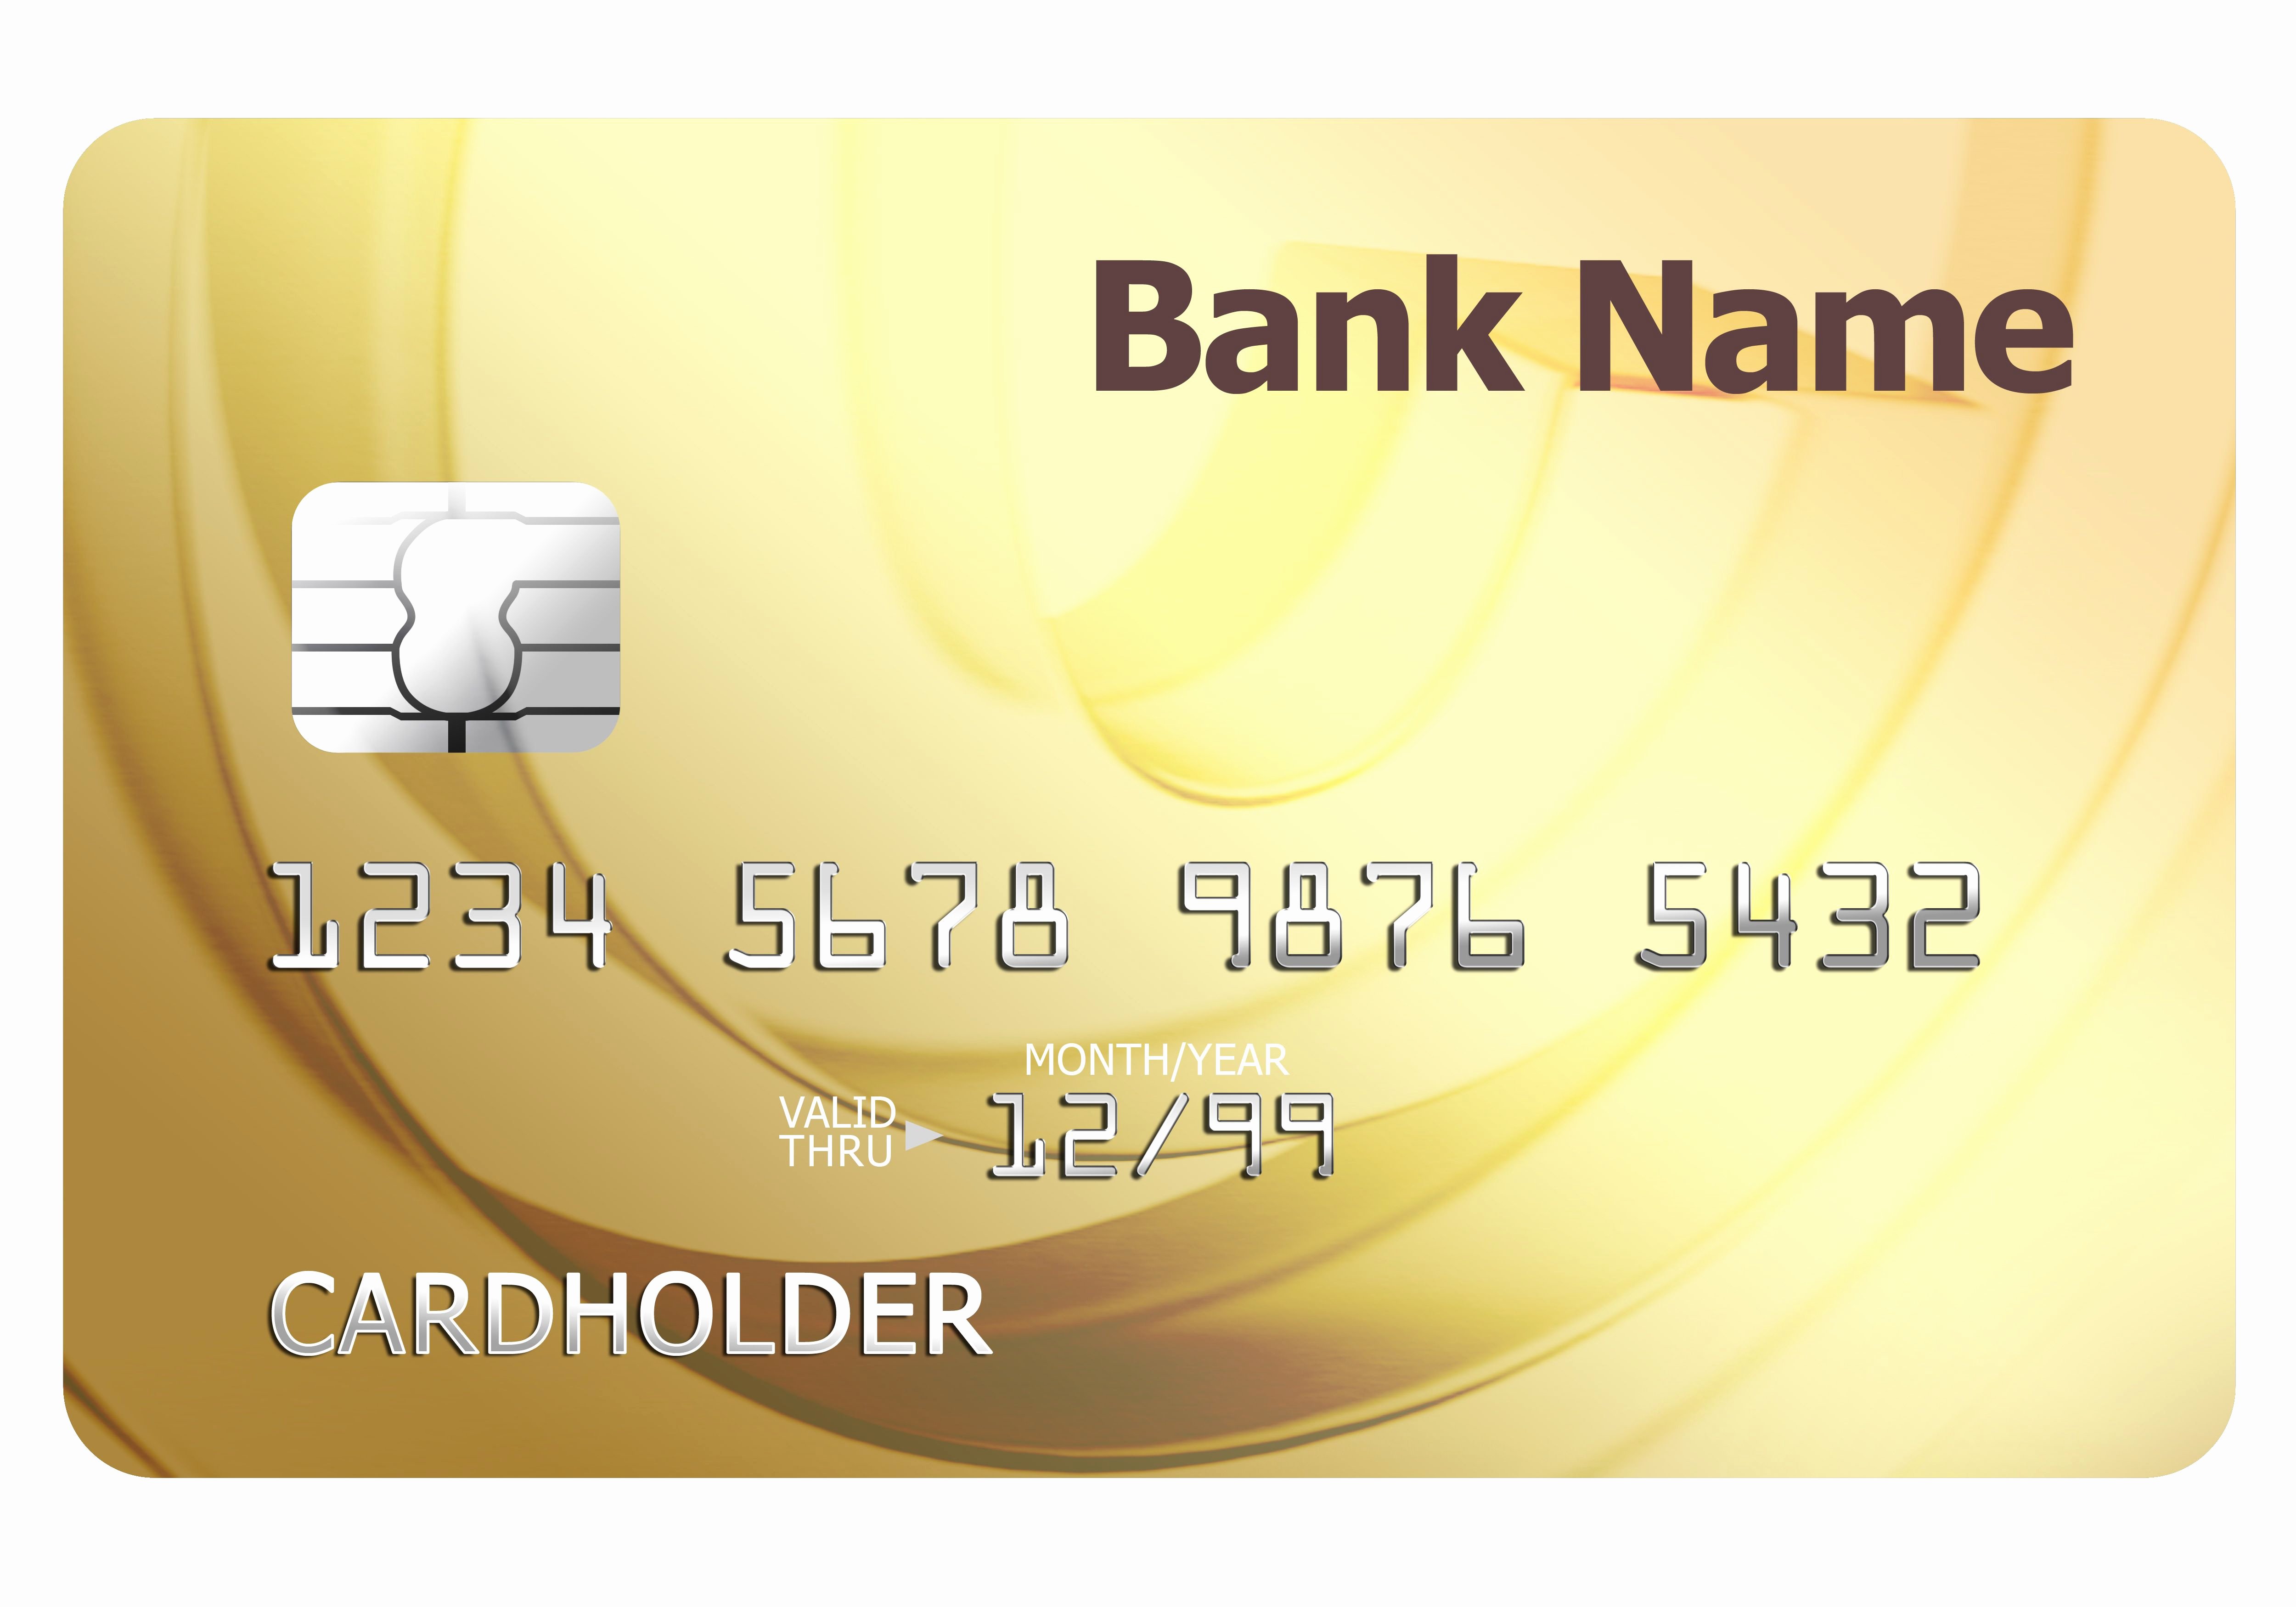 Credit Card Photoshop Template Fresh Famous Credit Card Design Sample Credit Card Gold Design